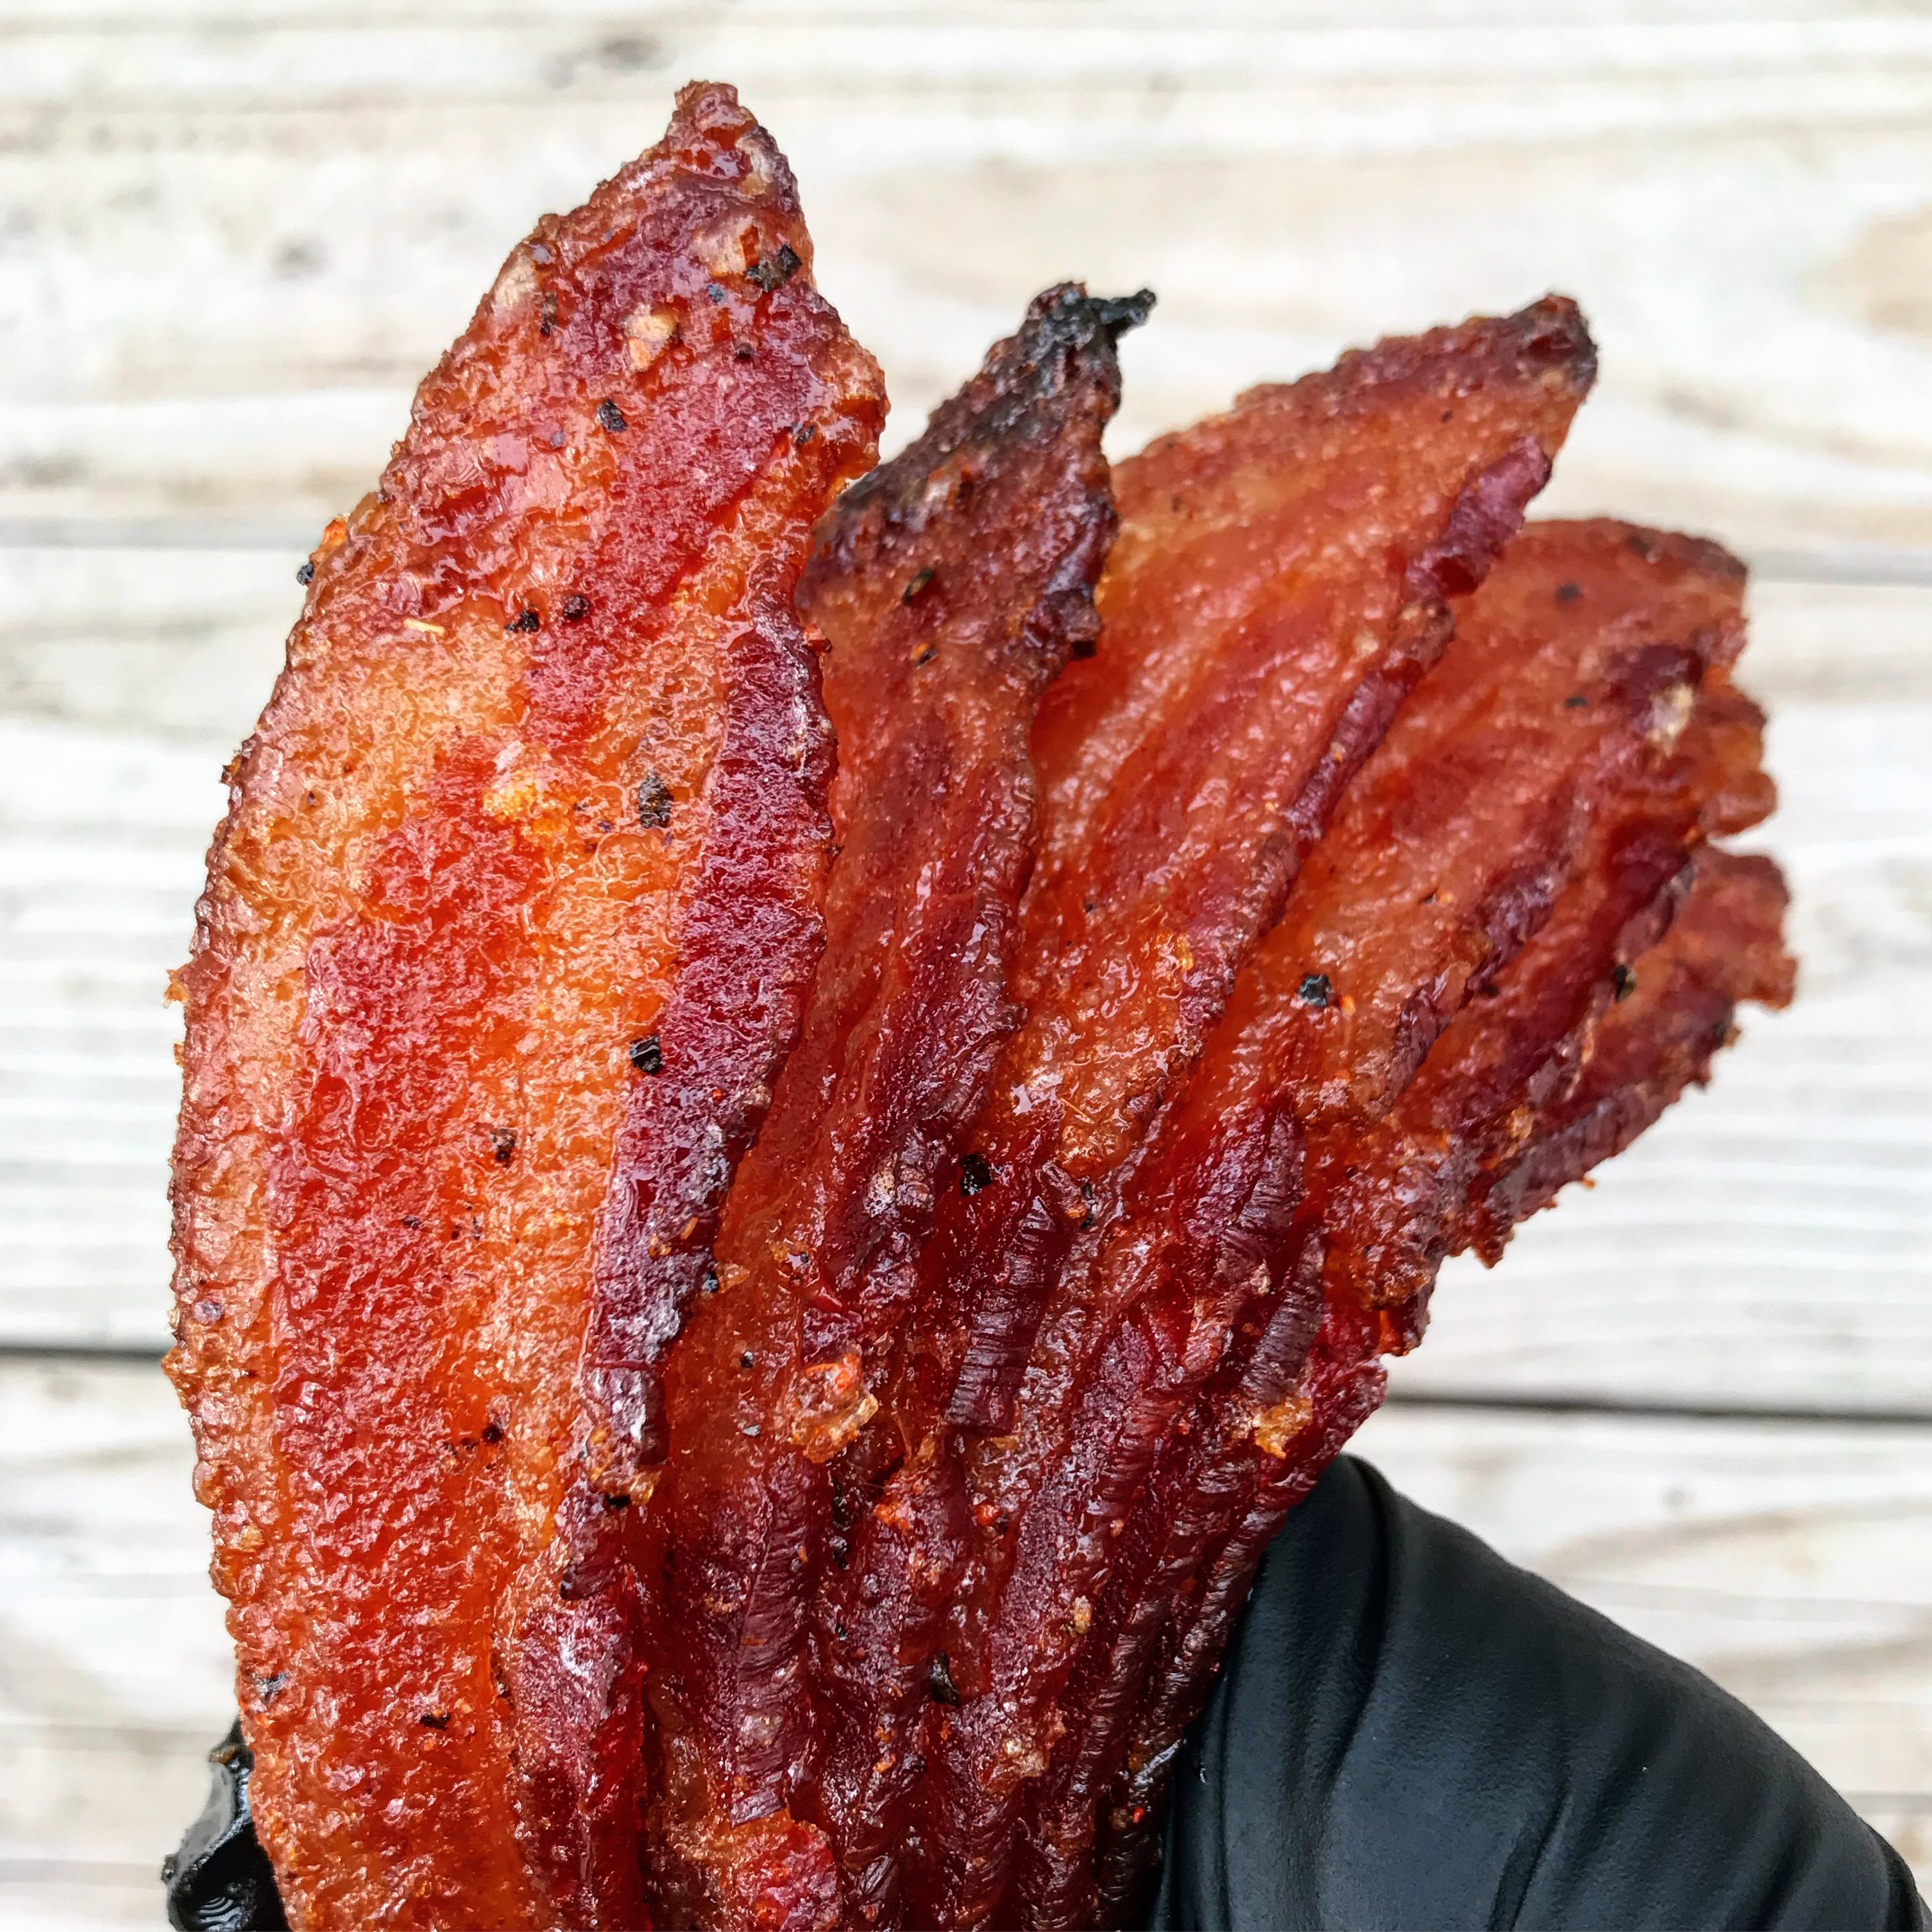 Smoked bacon candy in hand.